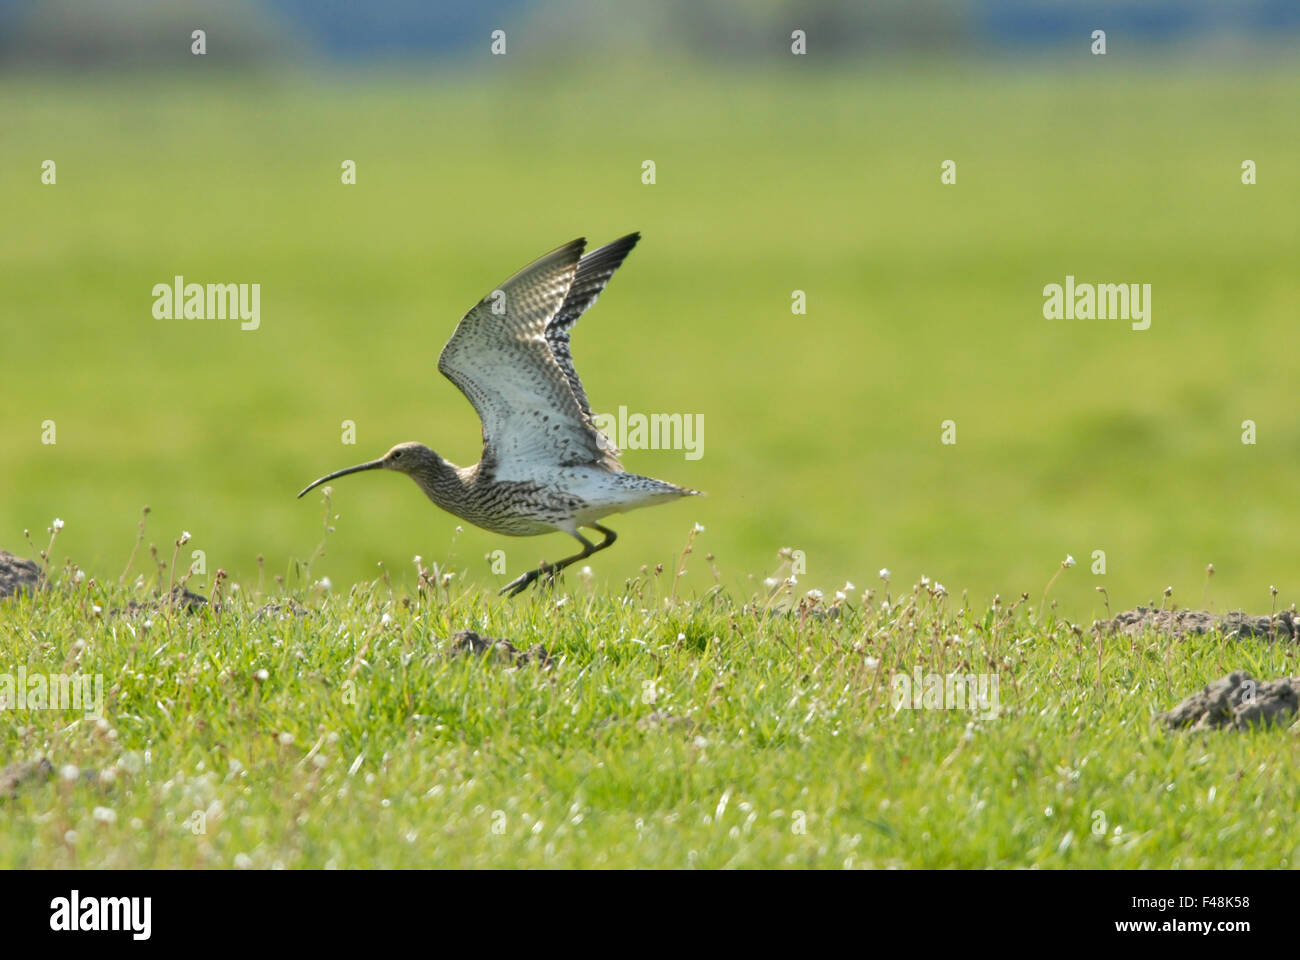 A Curlew on a field Stock Photo